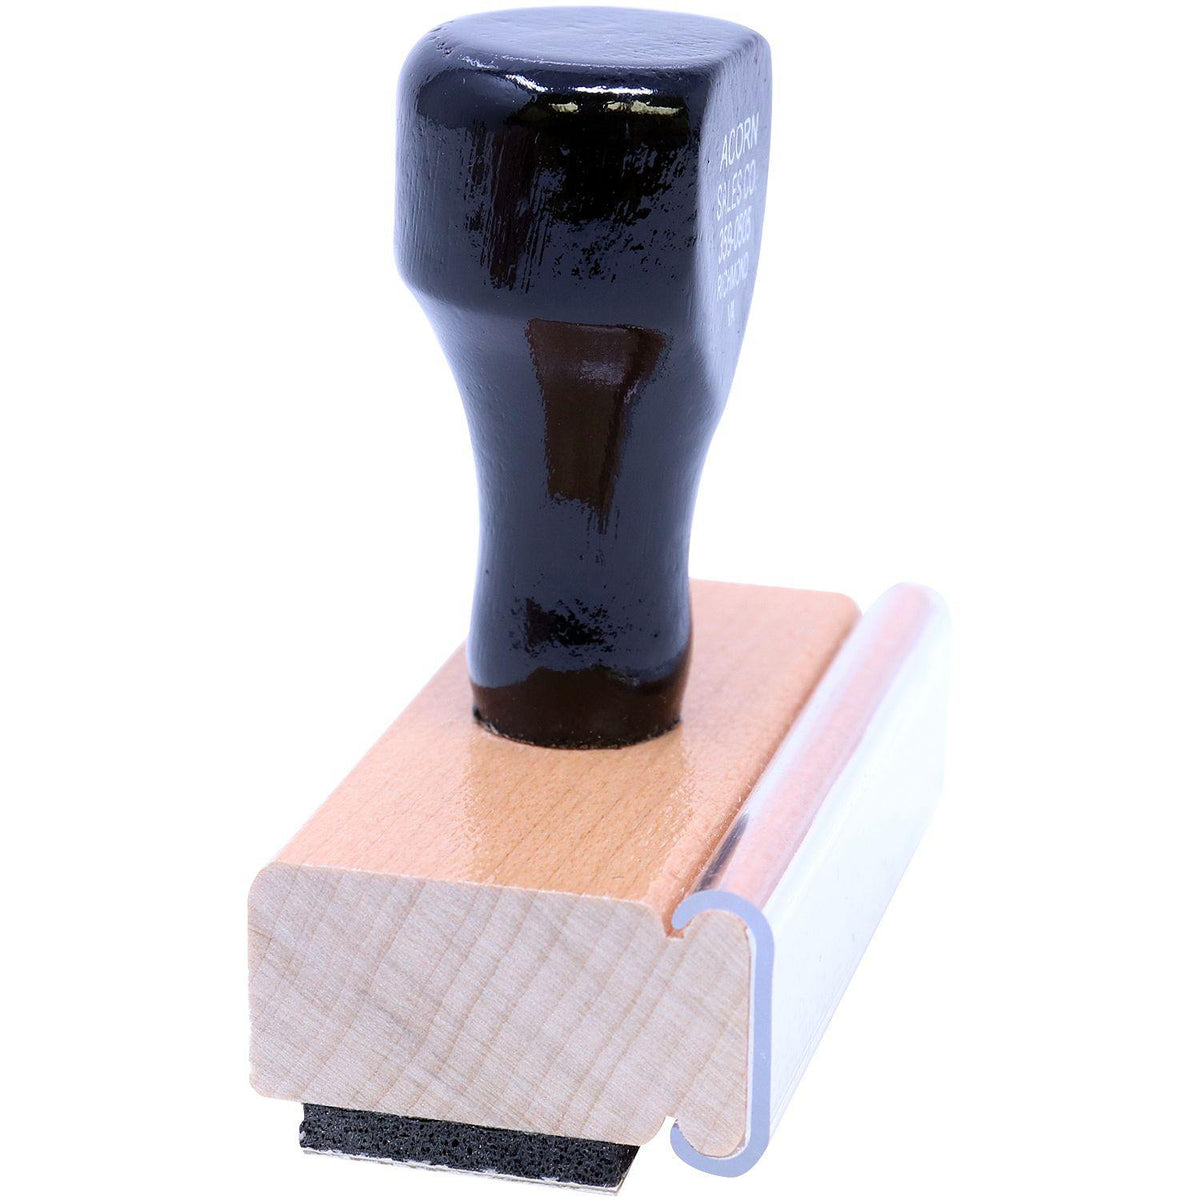 Narrow Font Return Receipt Requested Rubber Stamp - Engineer Seal Stamps - Brand_Acorn, Impression Size_Small, Stamp Type_Regular Stamp, Type of Use_Office, Type of Use_Postal &amp; Mailing